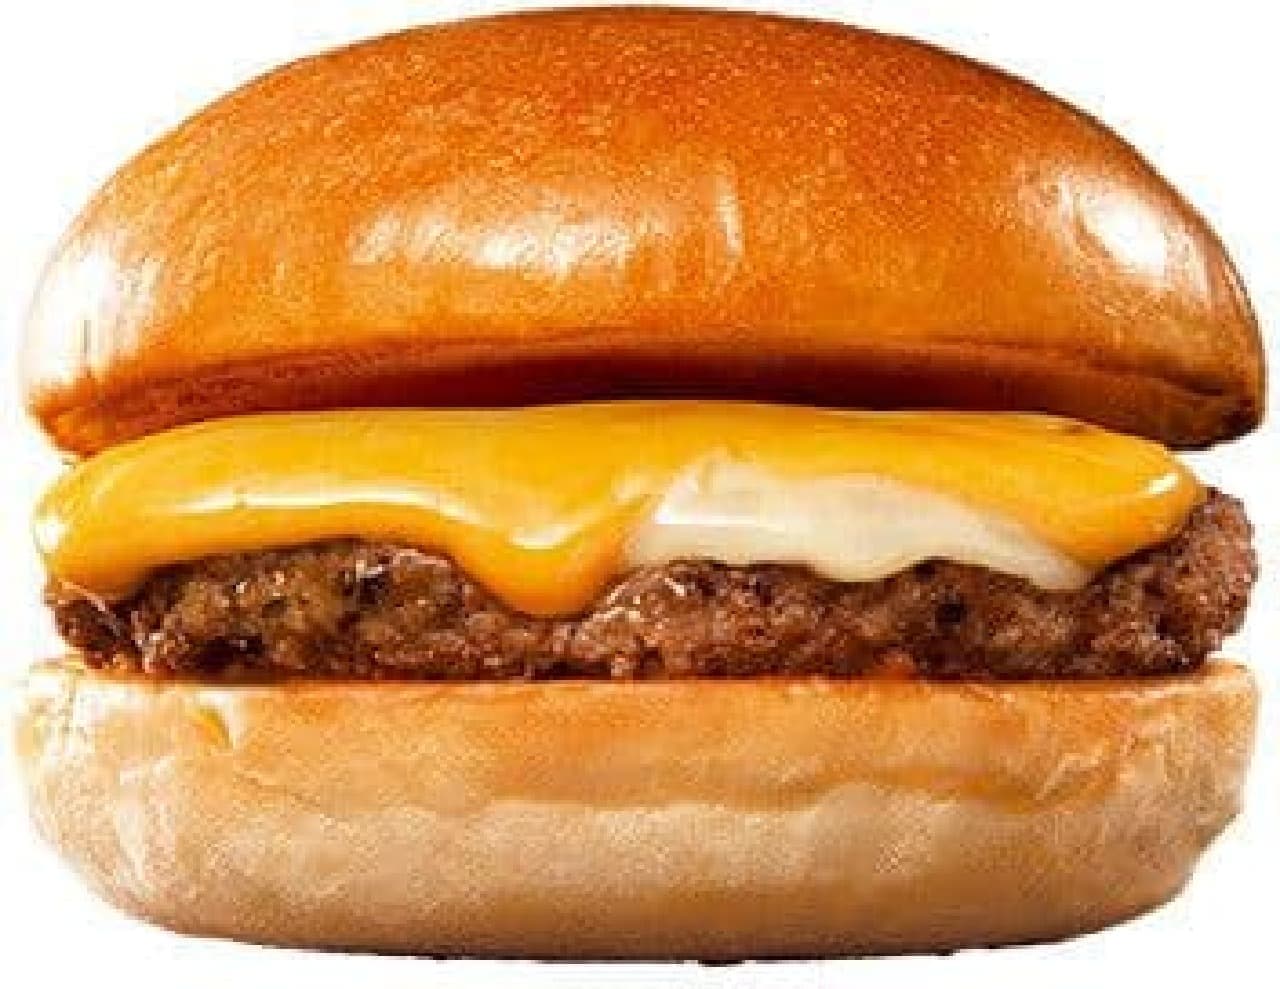 Lotteria "Excellent Cheeseburger (Morning)